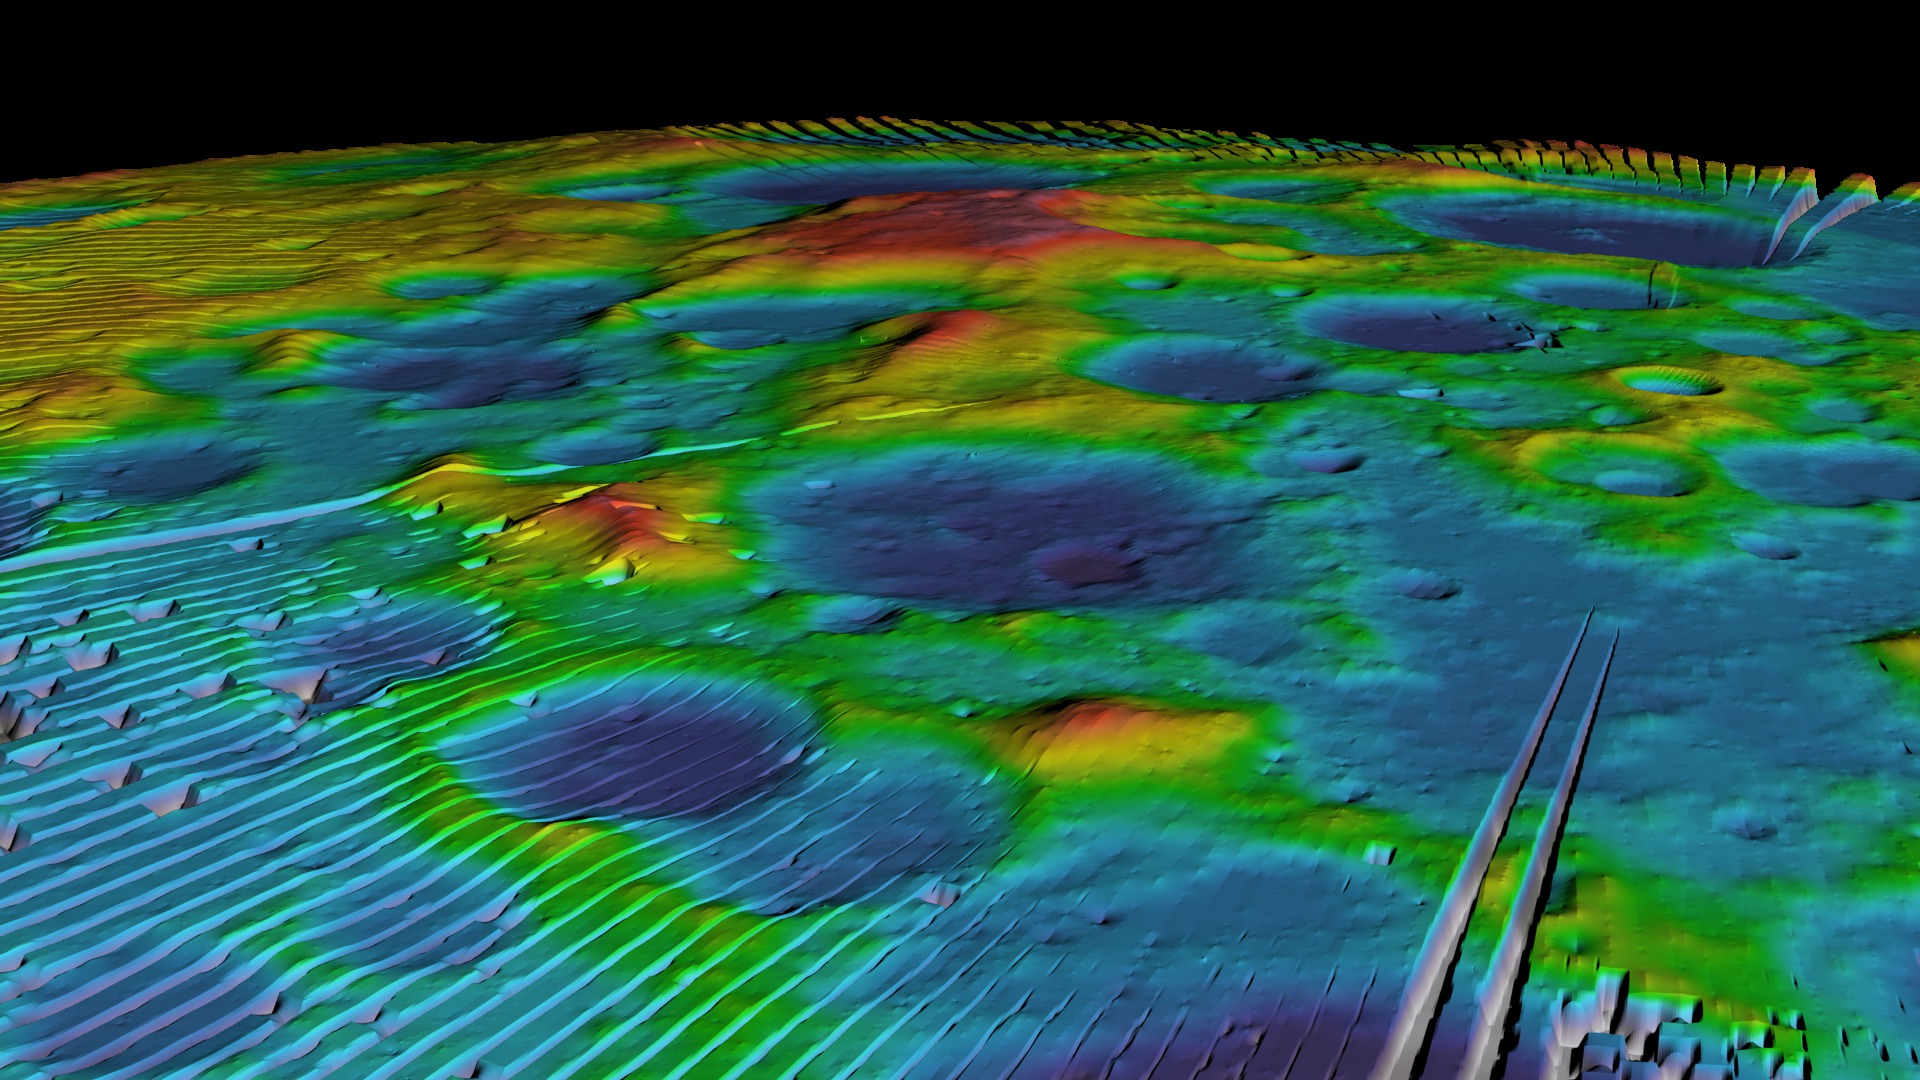 Preview Image for The Moon's South Pole in 3D via LRO/LOLA First Light Data